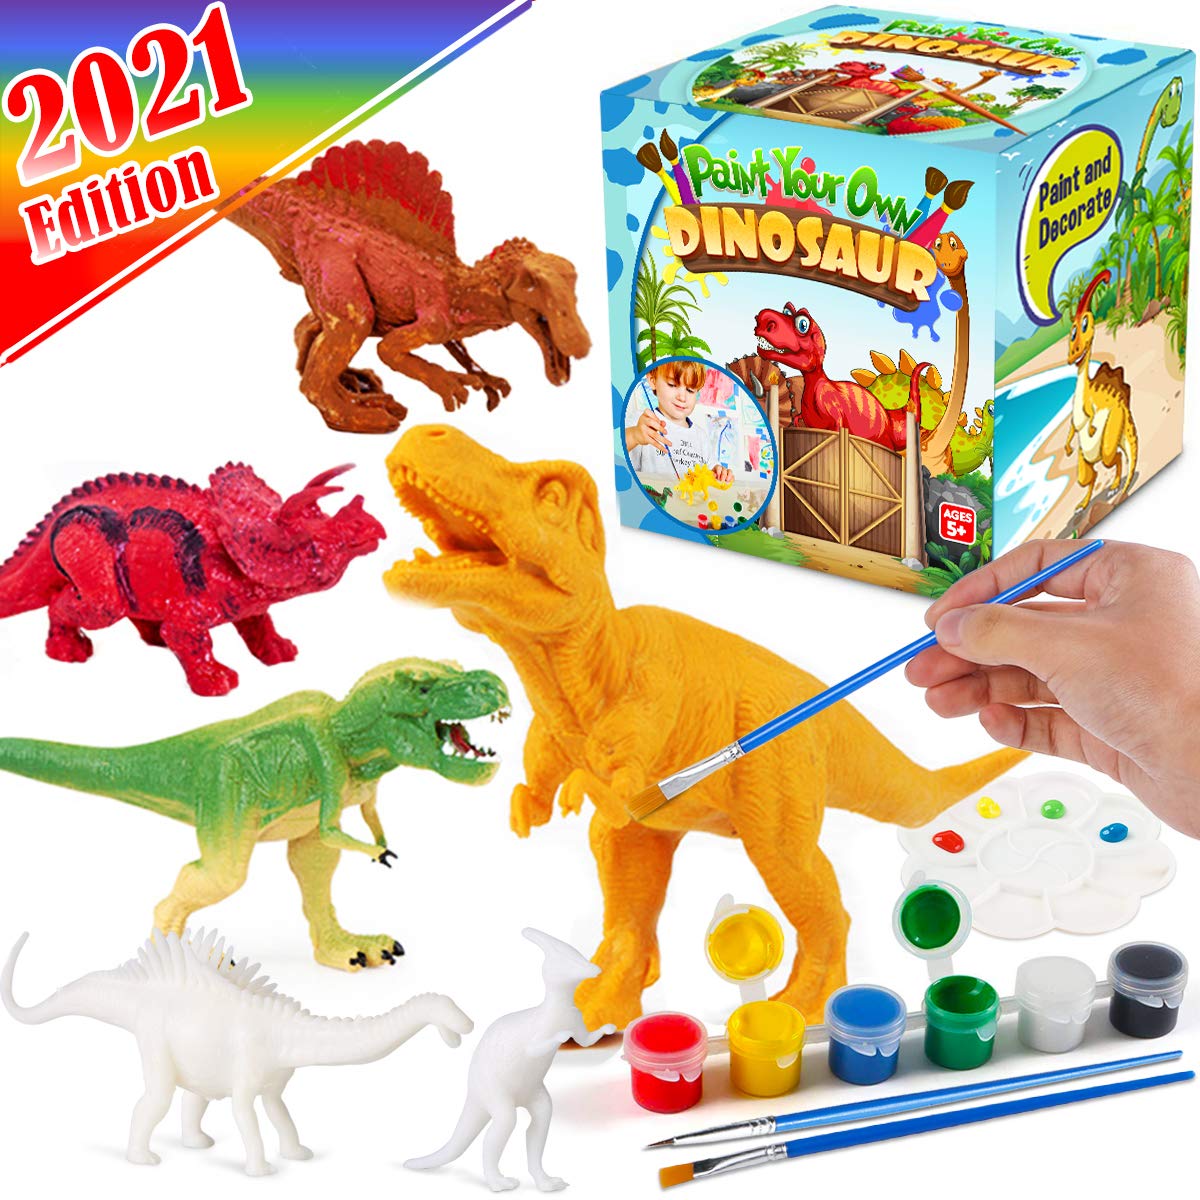 FUNZBO Kids Crafts and Arts Set Painting Kit - Dinosaurs Toys Art and Craft Supplies Party Favors for Boys Girls Age 4 5 6 7 Years Old Kid Creativity DIY Gift Set